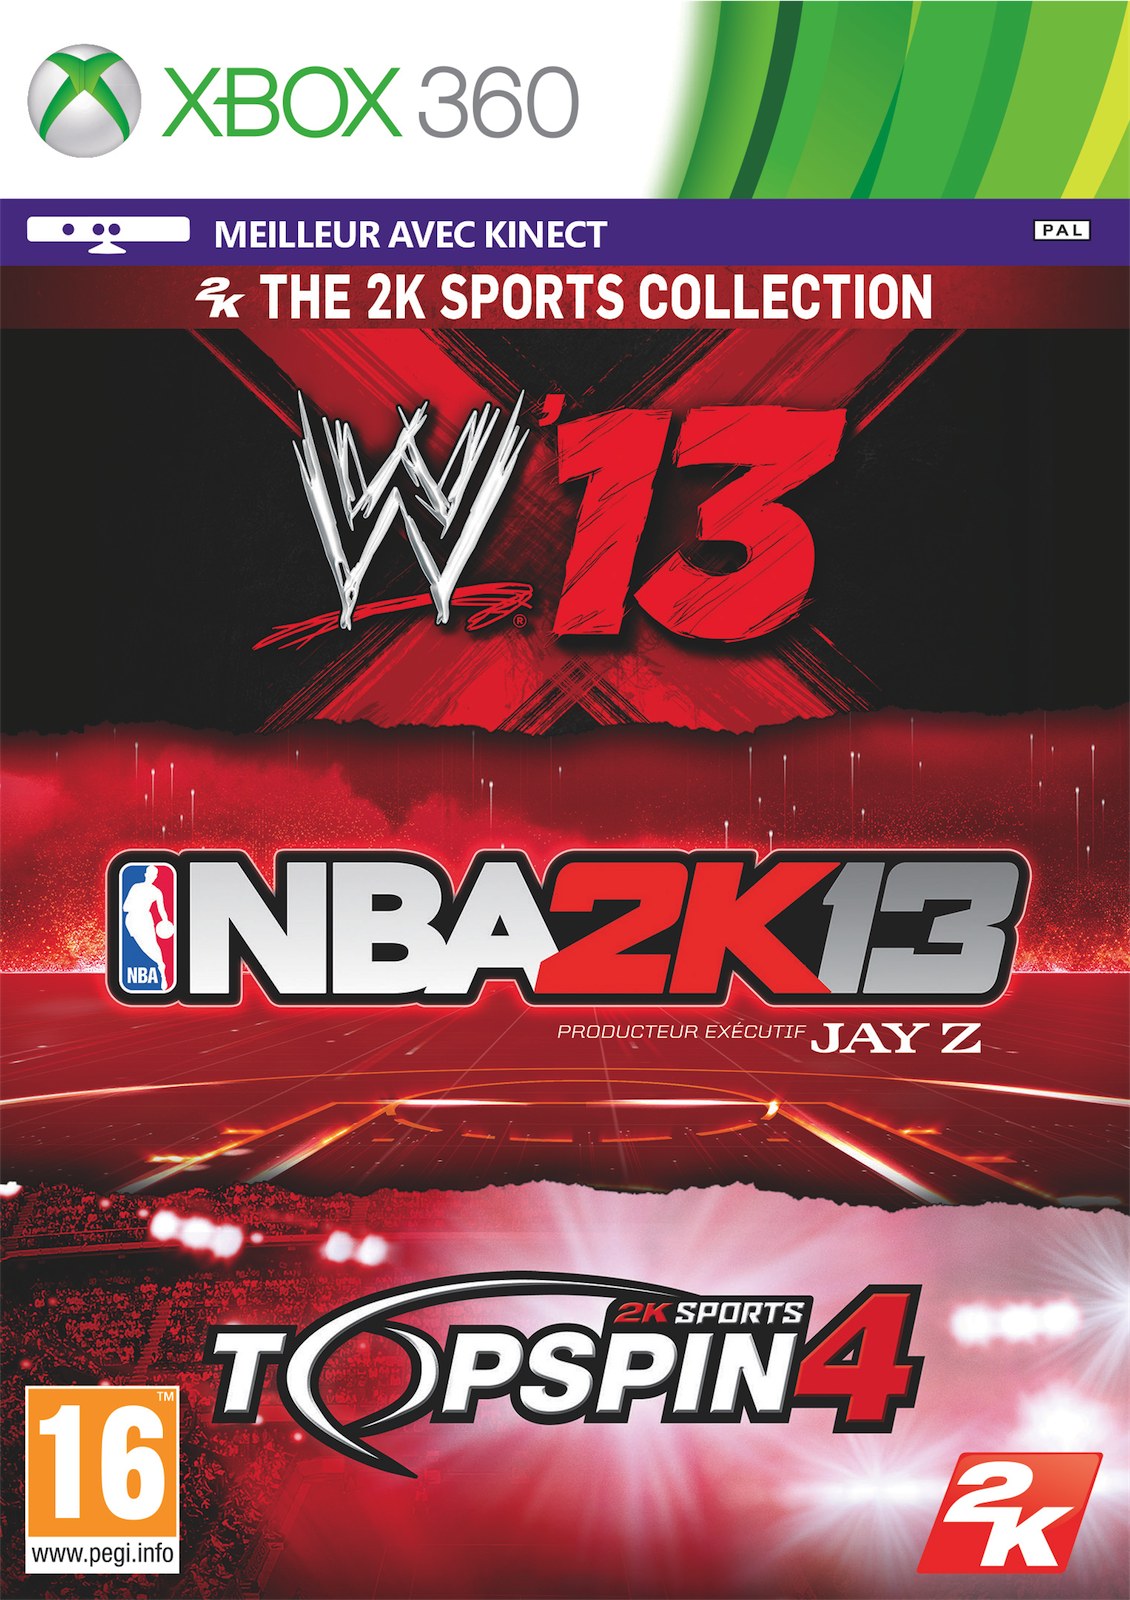 The 2K Sports Collection